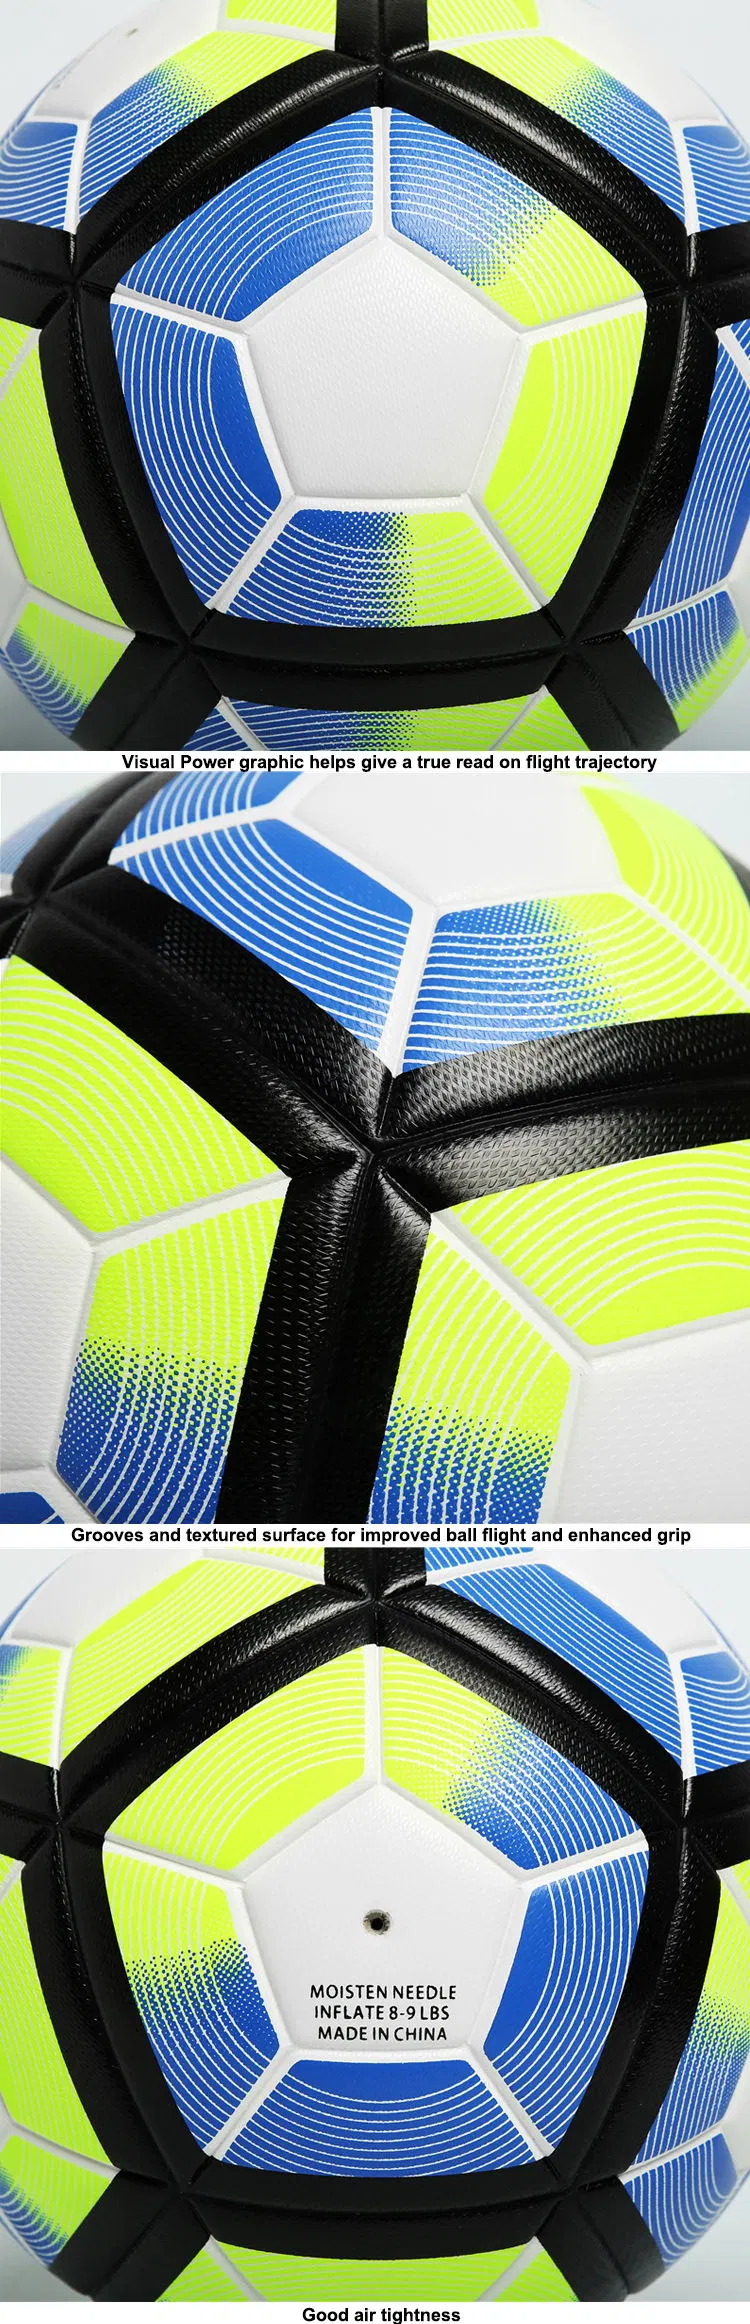 High Quality Textured Surface Leather Soccer Ball